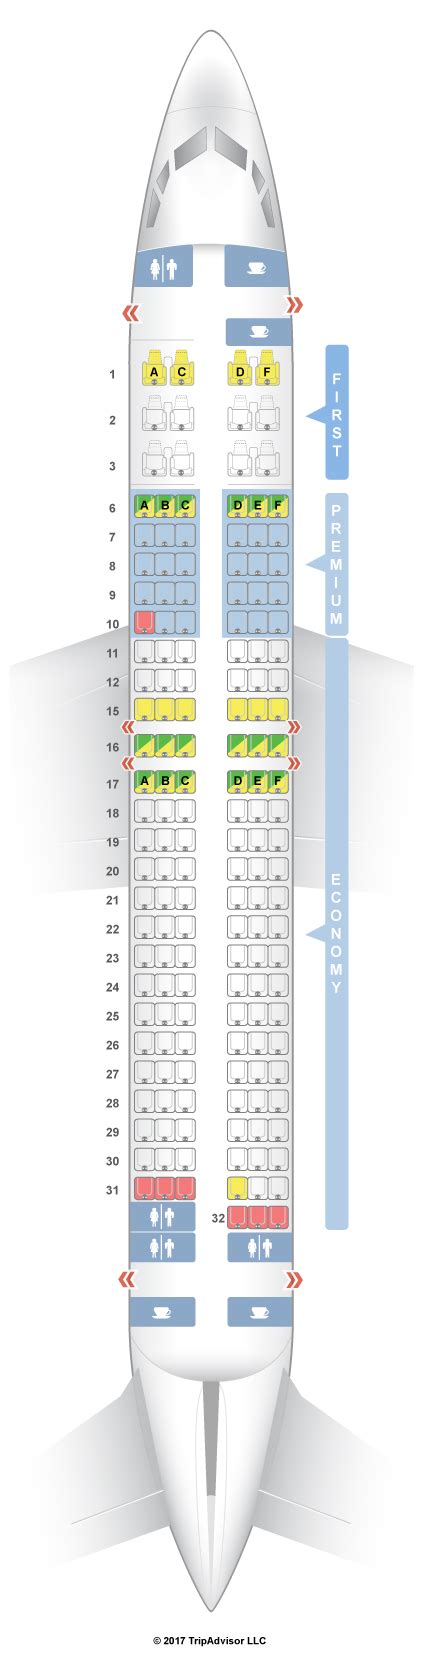 General presentation. There are 84 Boeing 737s in the Alaska Airway's fleet, of which 12 are the 900 (739) model. There are two different configurations for this model. (The difference is that in one configuration the emergency exits are between rows 13-15 (this configuration) and in the other between rows 14-16 - choose row 15 if you want .... 